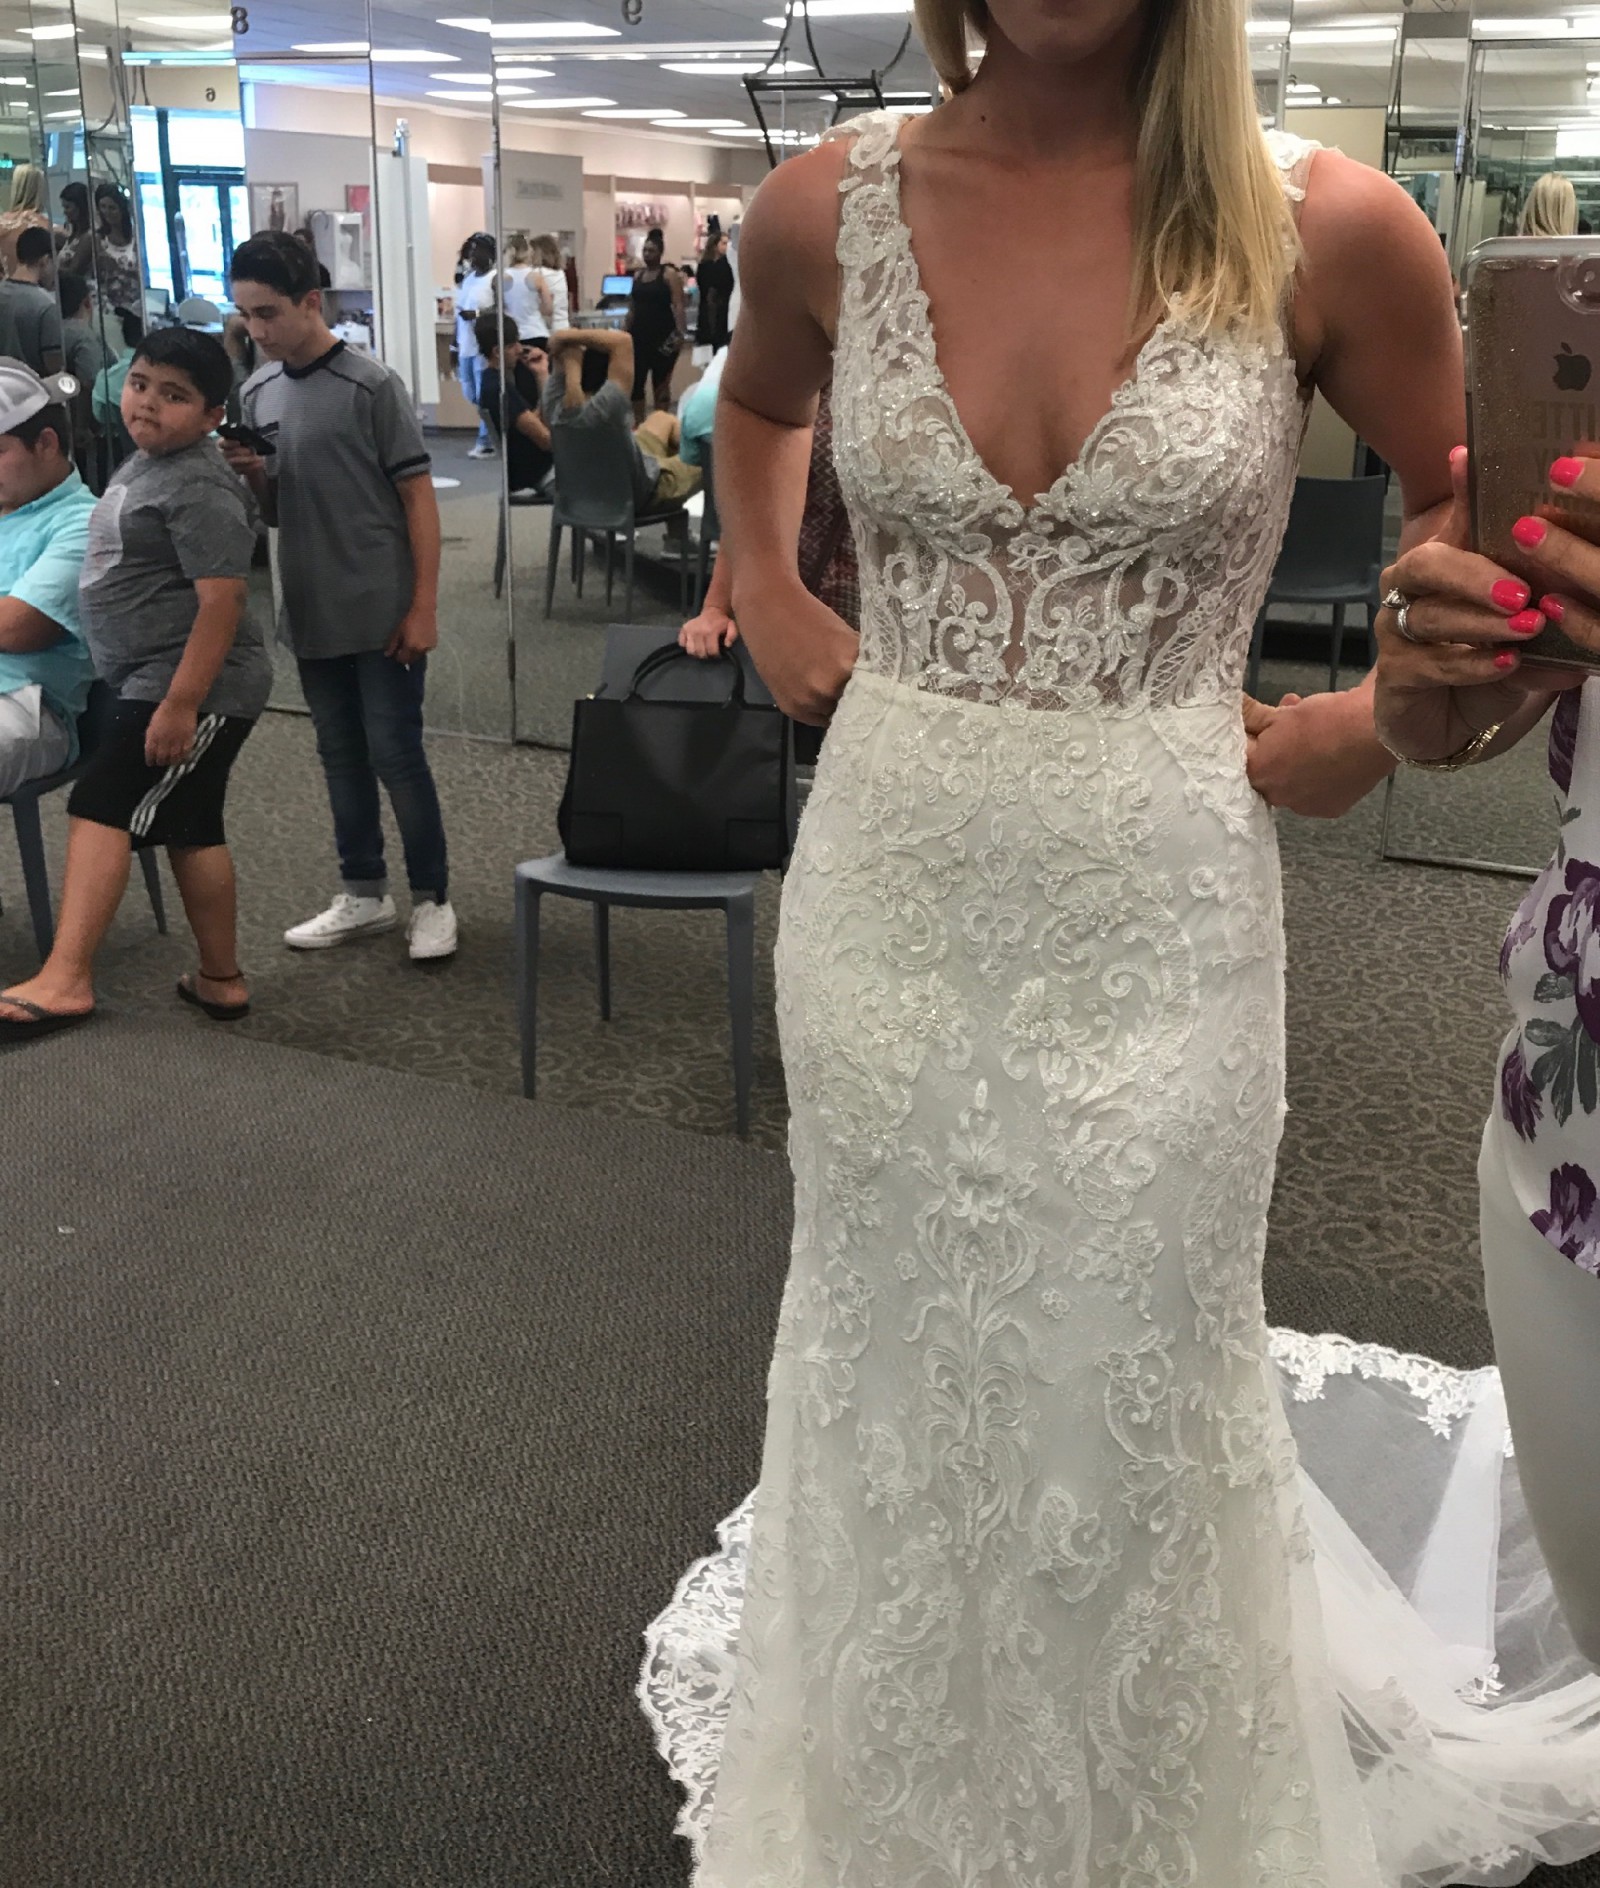 lace blessing dress